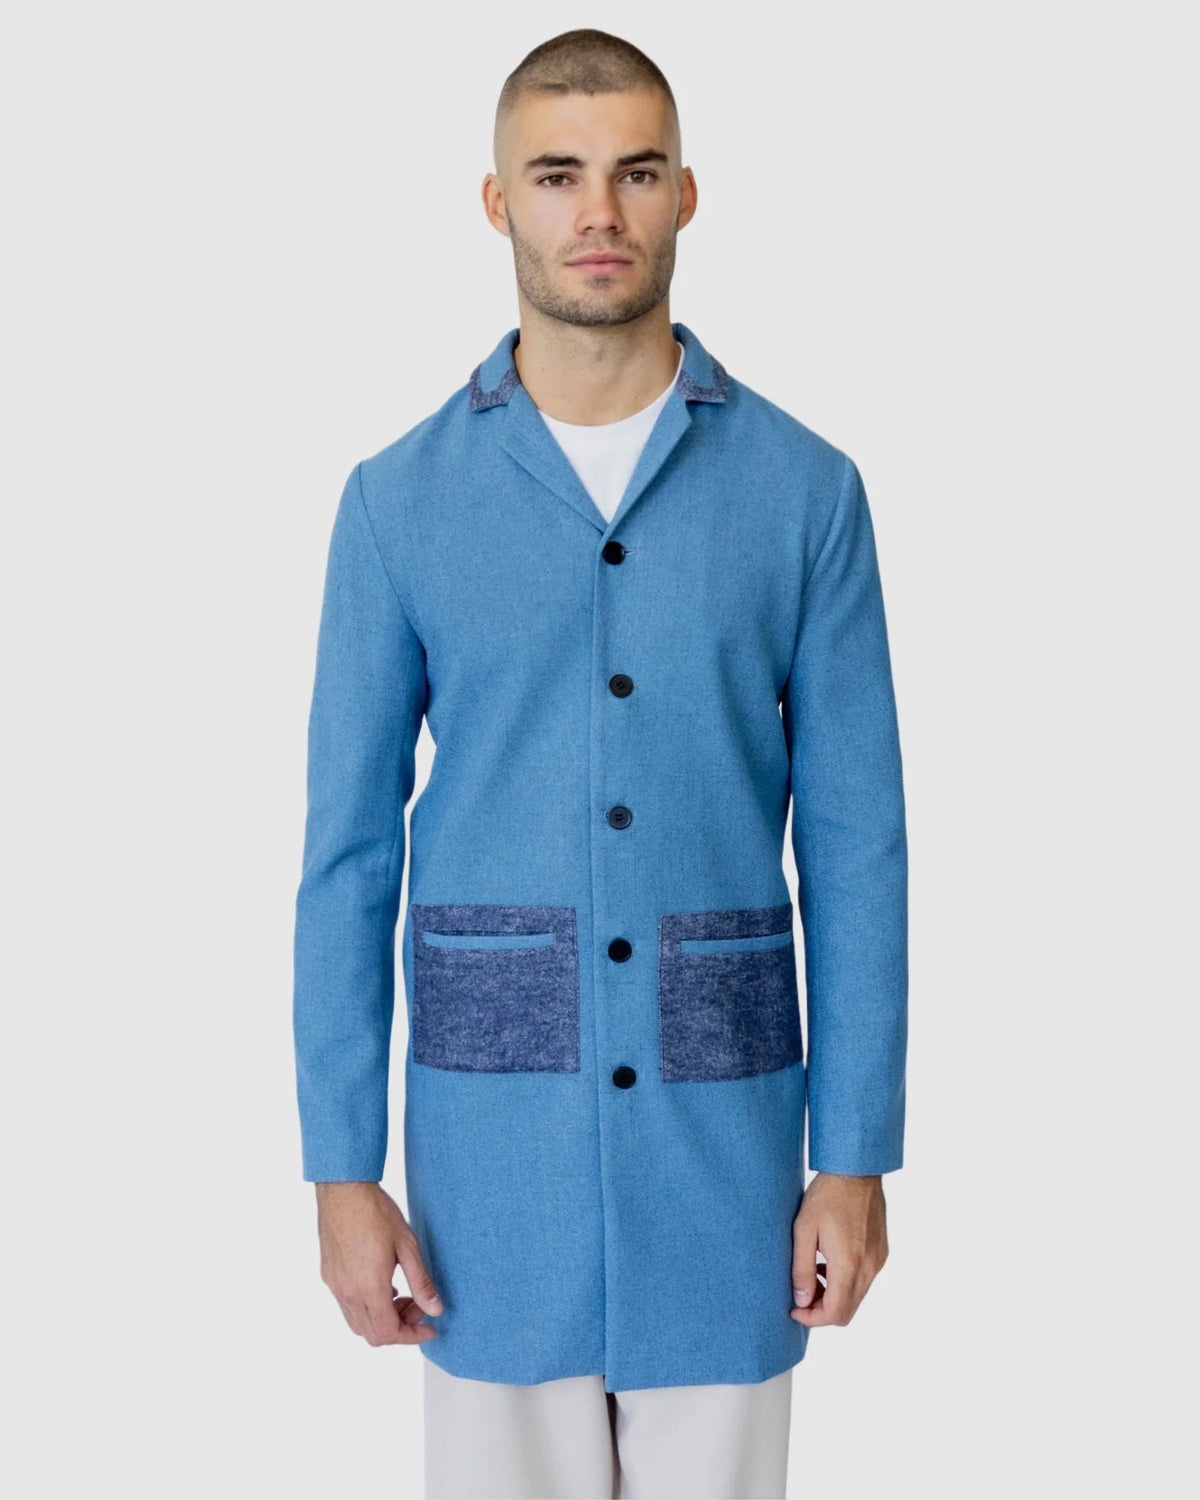 Justin Cassin Hemming Woven Coat in Blue Color